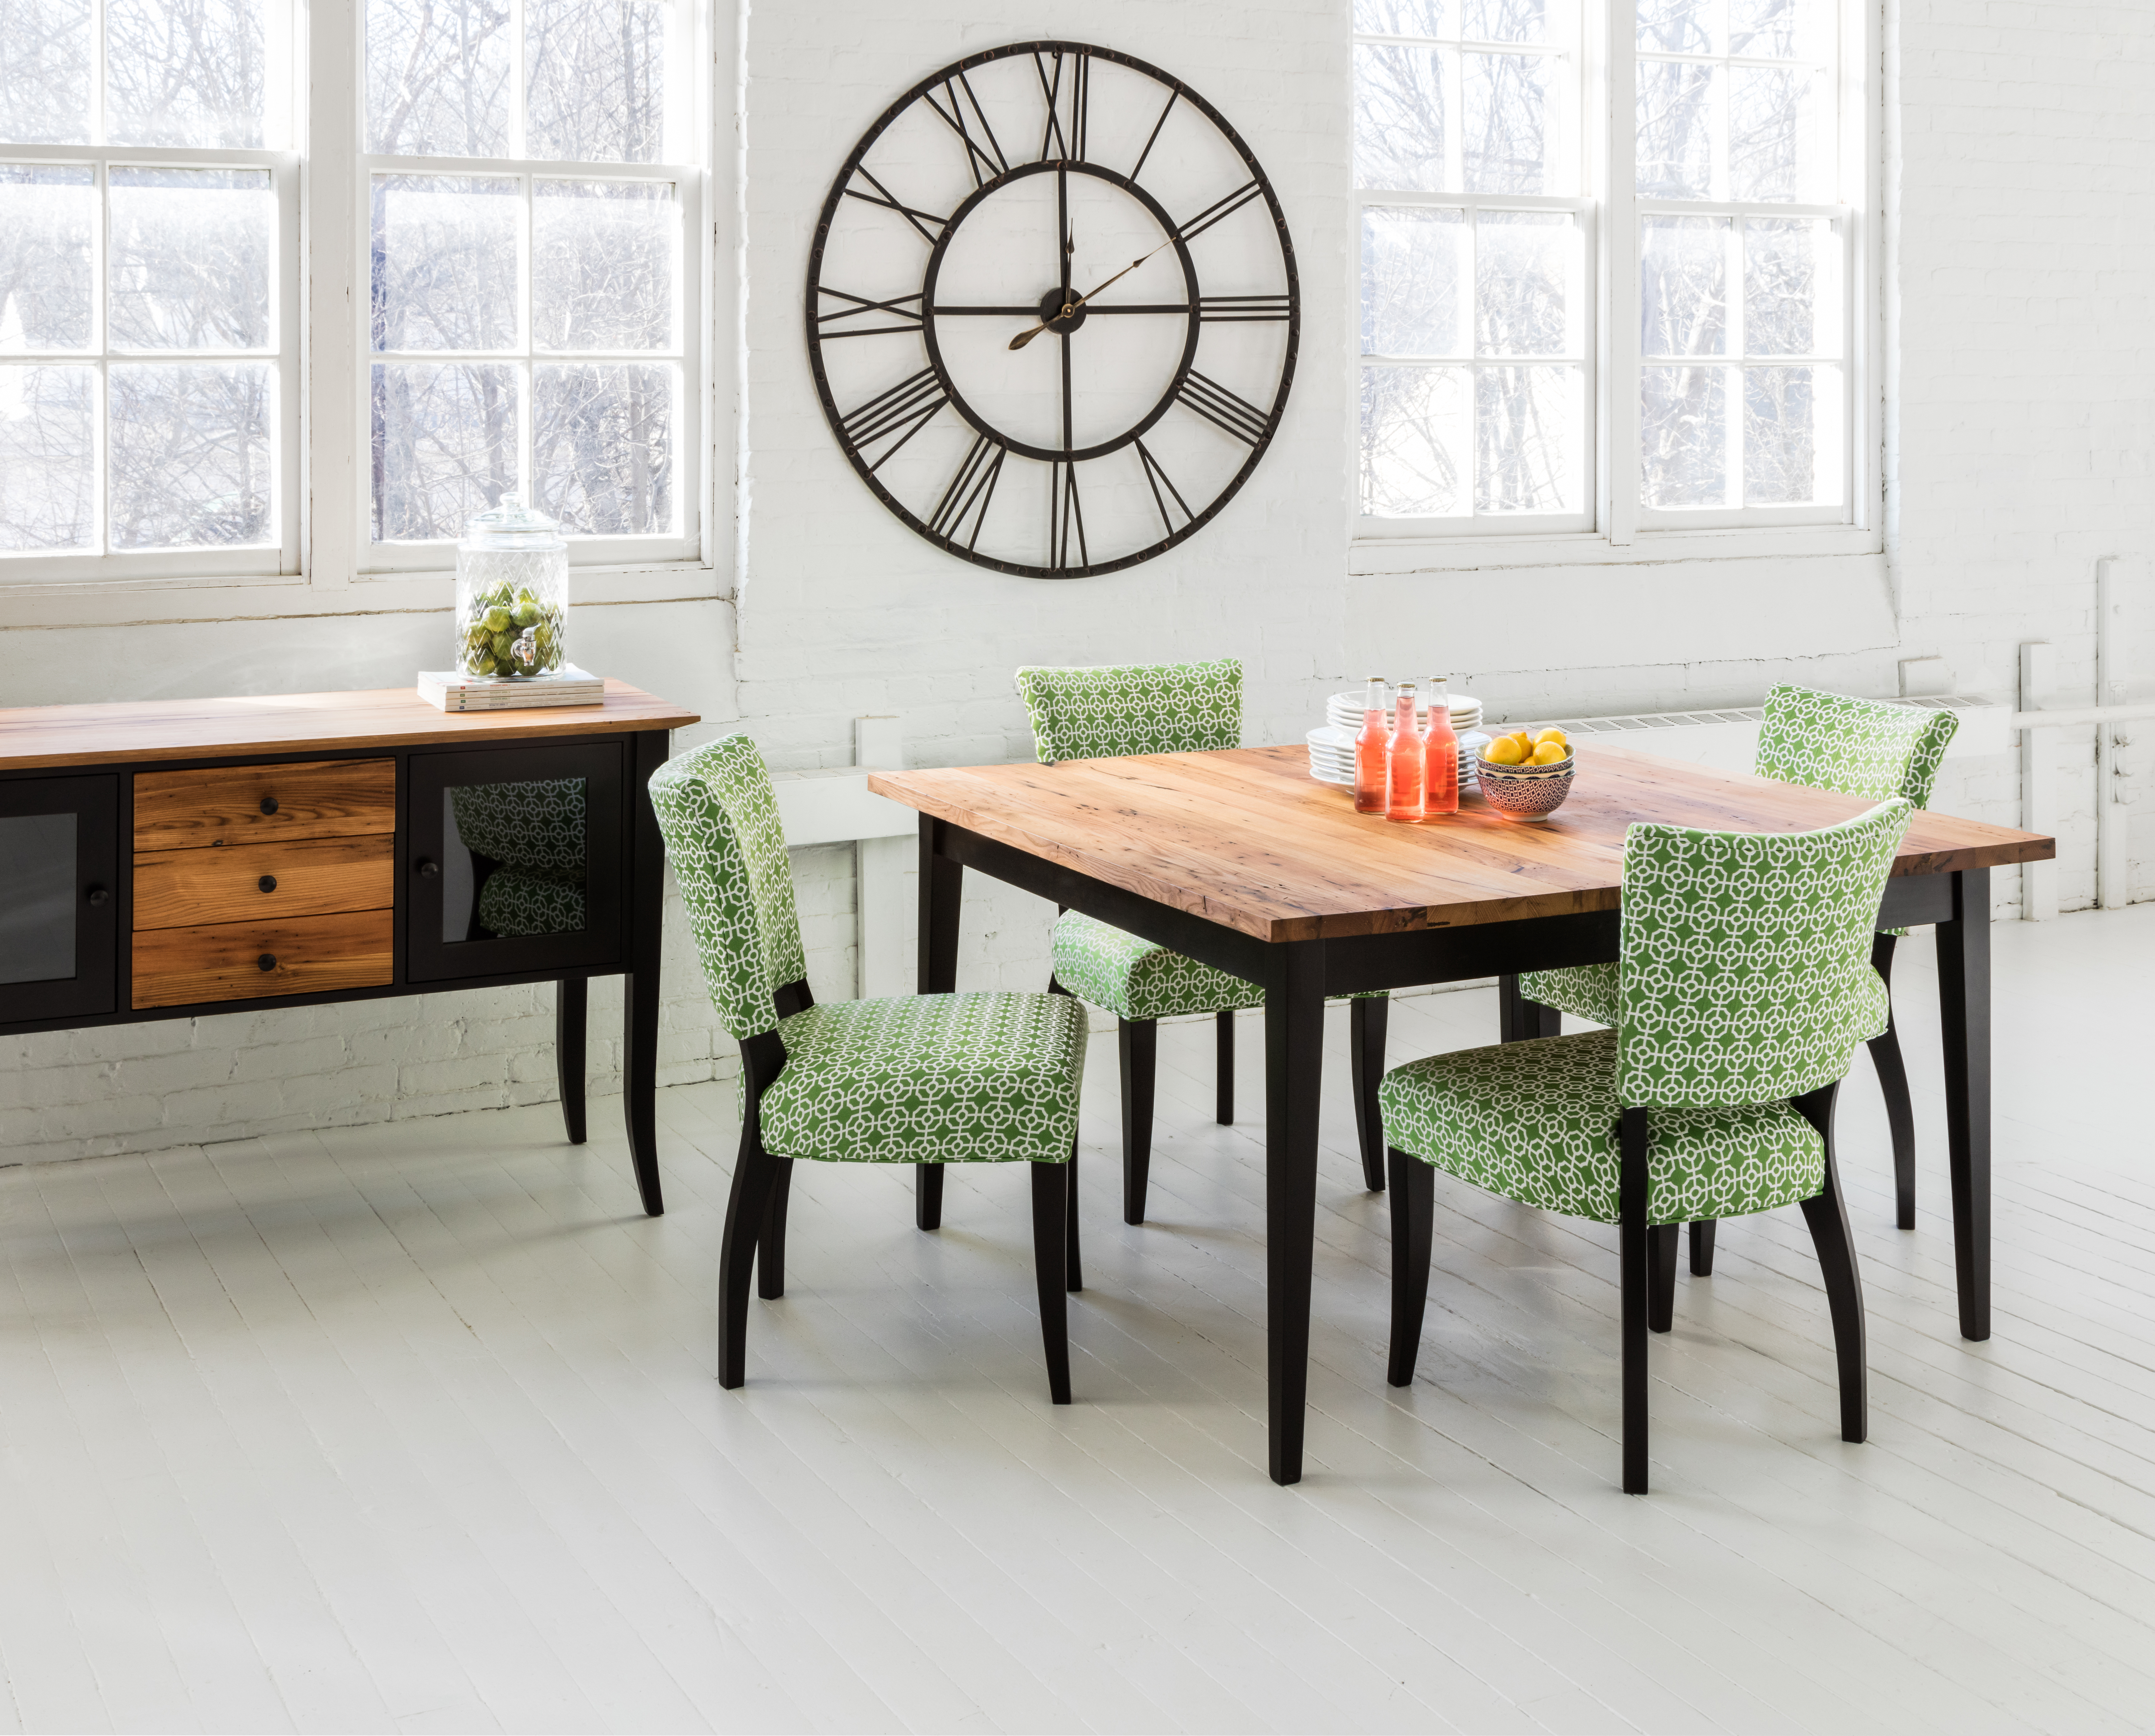 Circle Furniture Reclaimed Table